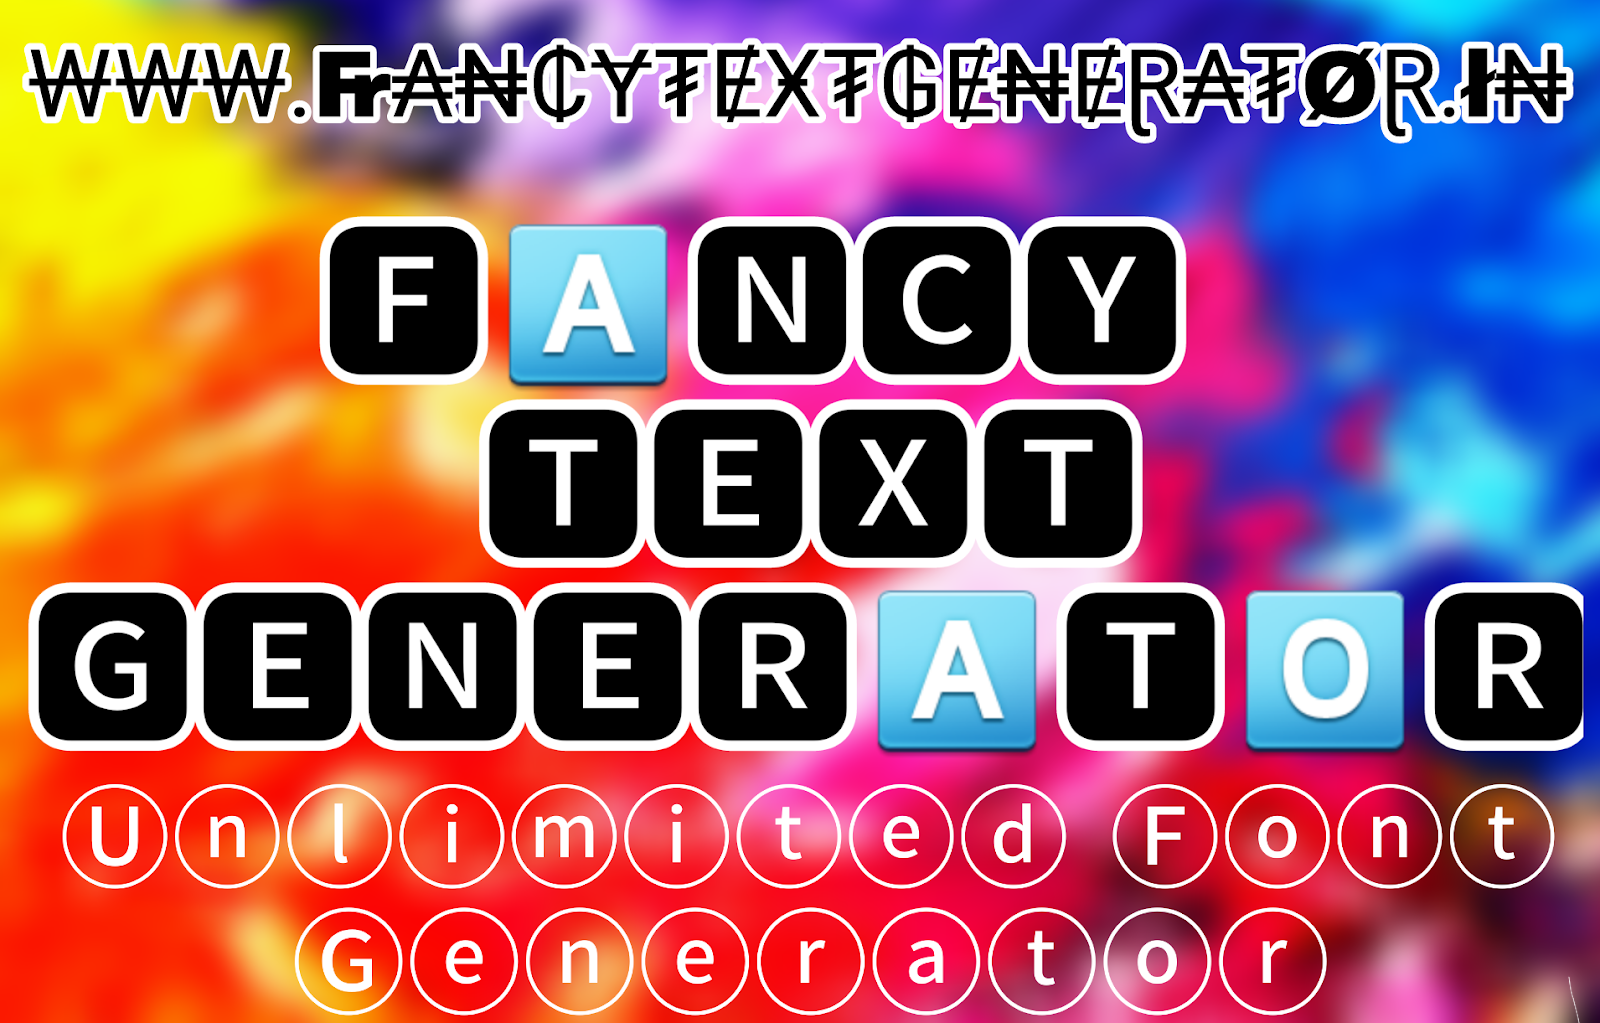 𝟙 Fancy Text Generator ℂ𝕠𝕠𝕝 𝐹𝒶𝓃𝒸𝓎 𝐒𝐭𝐲𝐥𝐢𝐬𝐡 𝐟𝐨𝐧𝐭𝐬 Copy And Paste